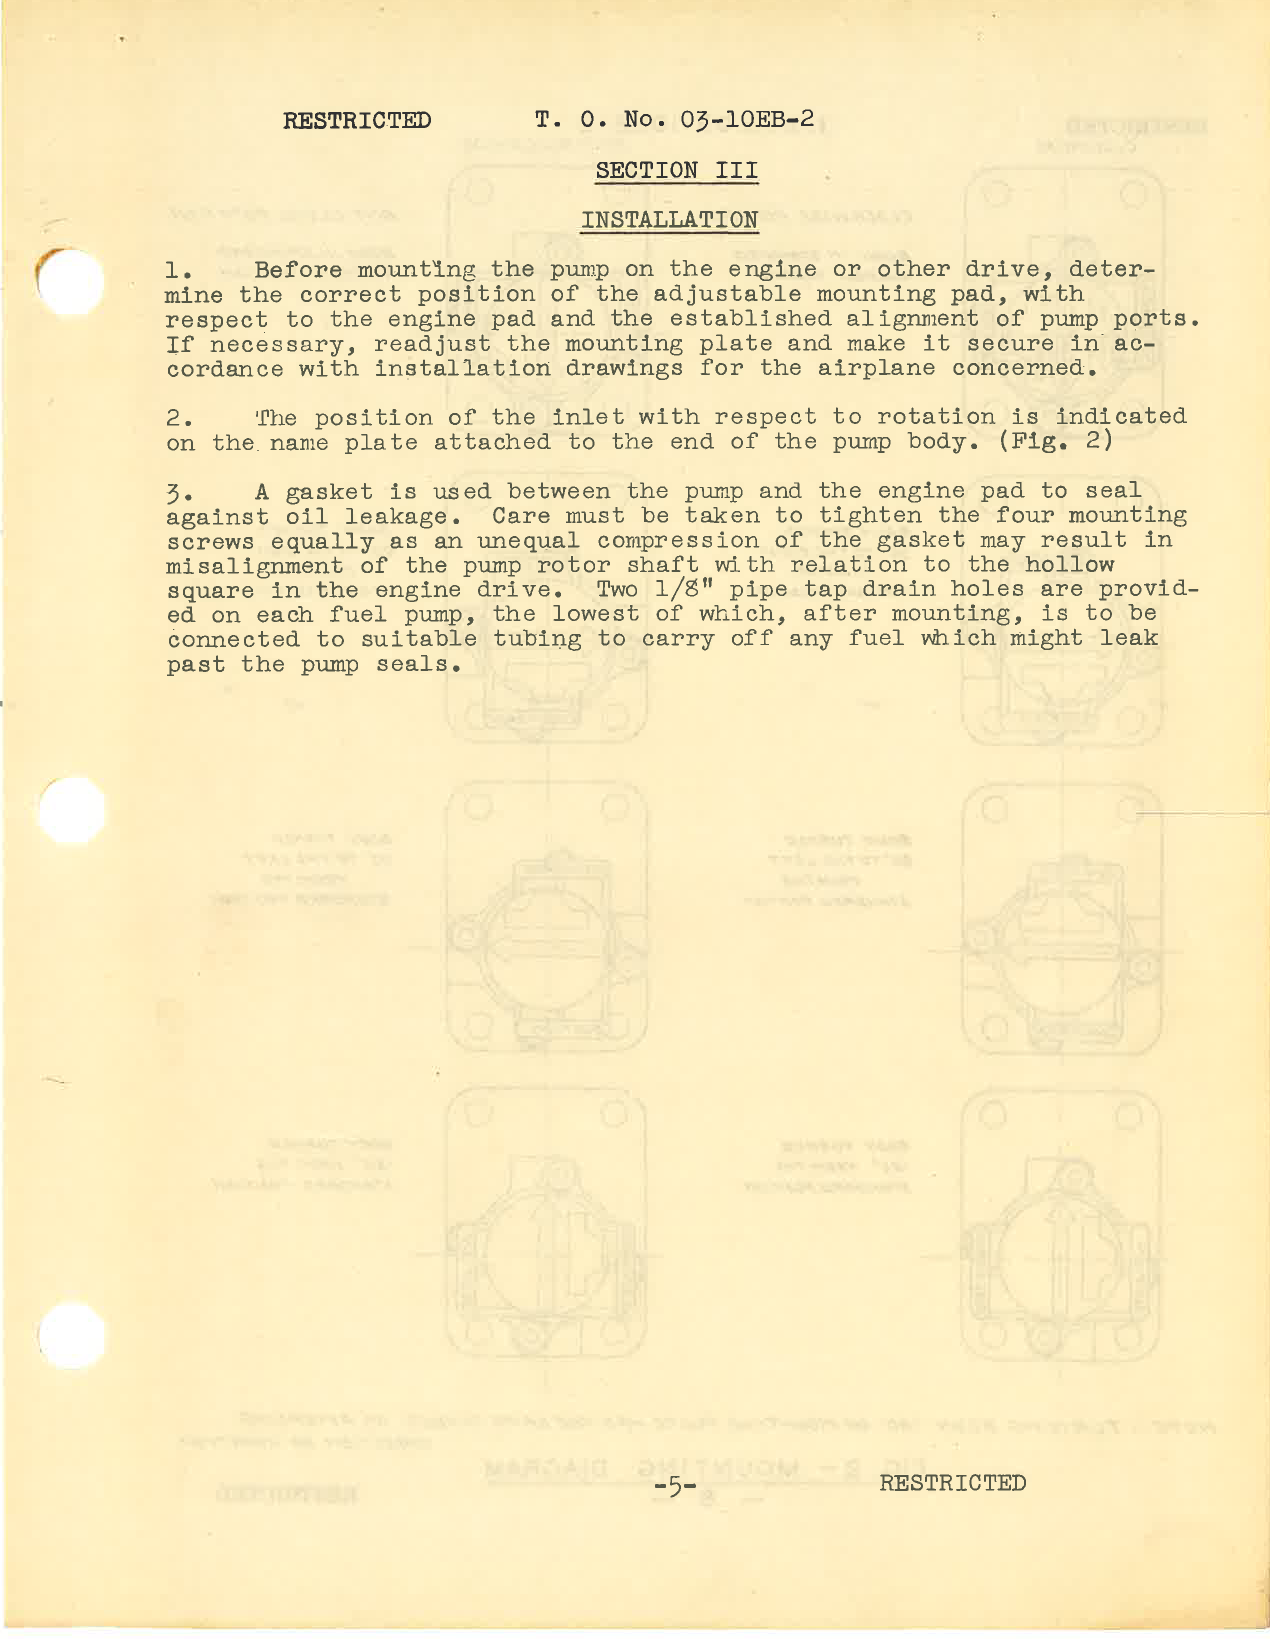 Sample page 7 from AirCorps Library document: Handbook of Instructions for Engine Driven Fuel Pumps Type F-4A